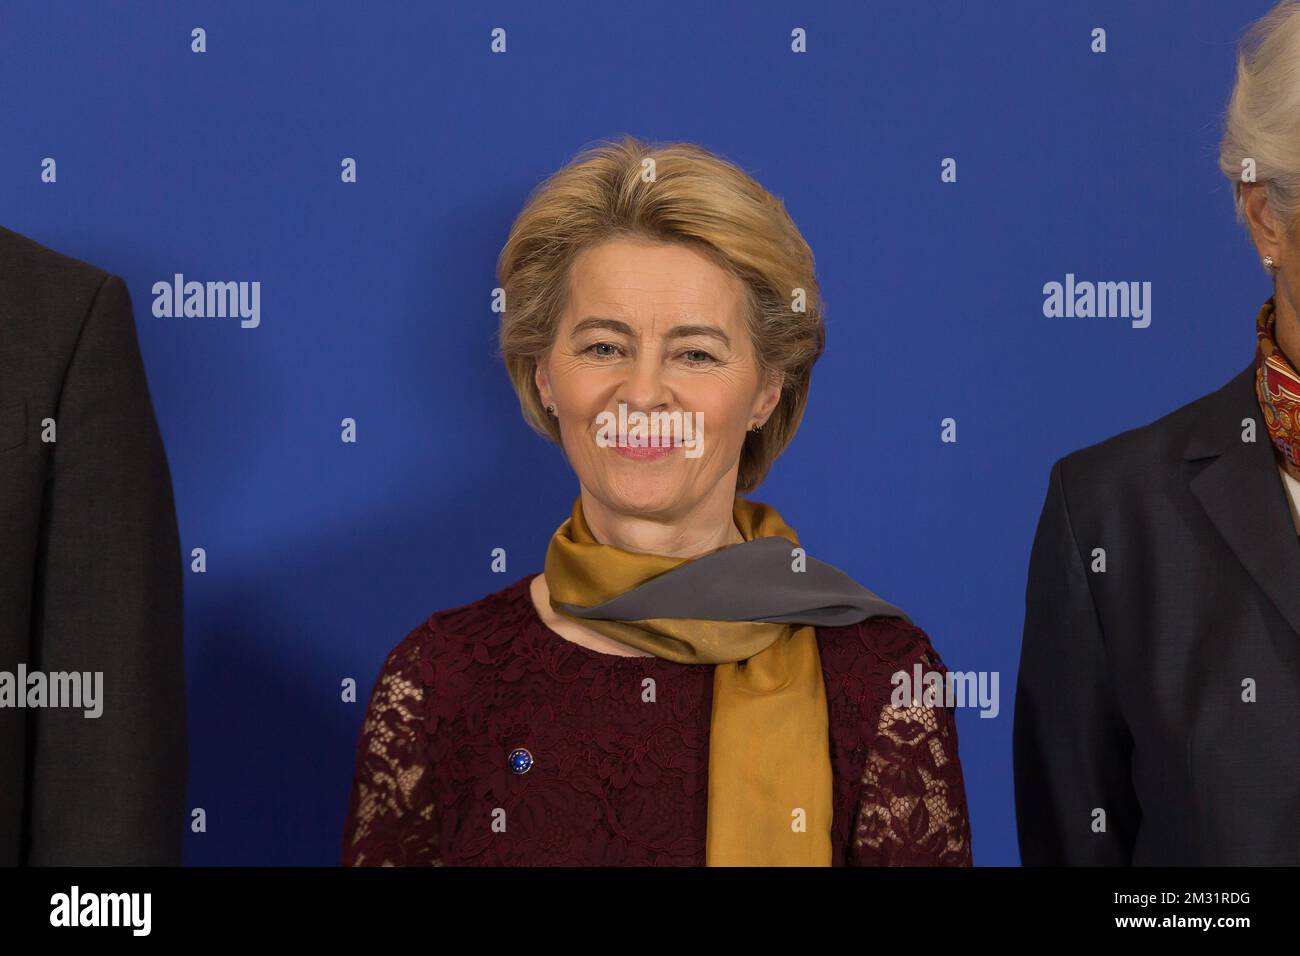 New European Commission President Ursula Von der Leyen pictured during a celebration on the occasion of the 10th anniversary of the Lisbon Treaty at the European headquarters in Brussels, Sunday 01 December 2019. BELGA PHOTO JAMES ARTHUR GEKIERE Stock Photo